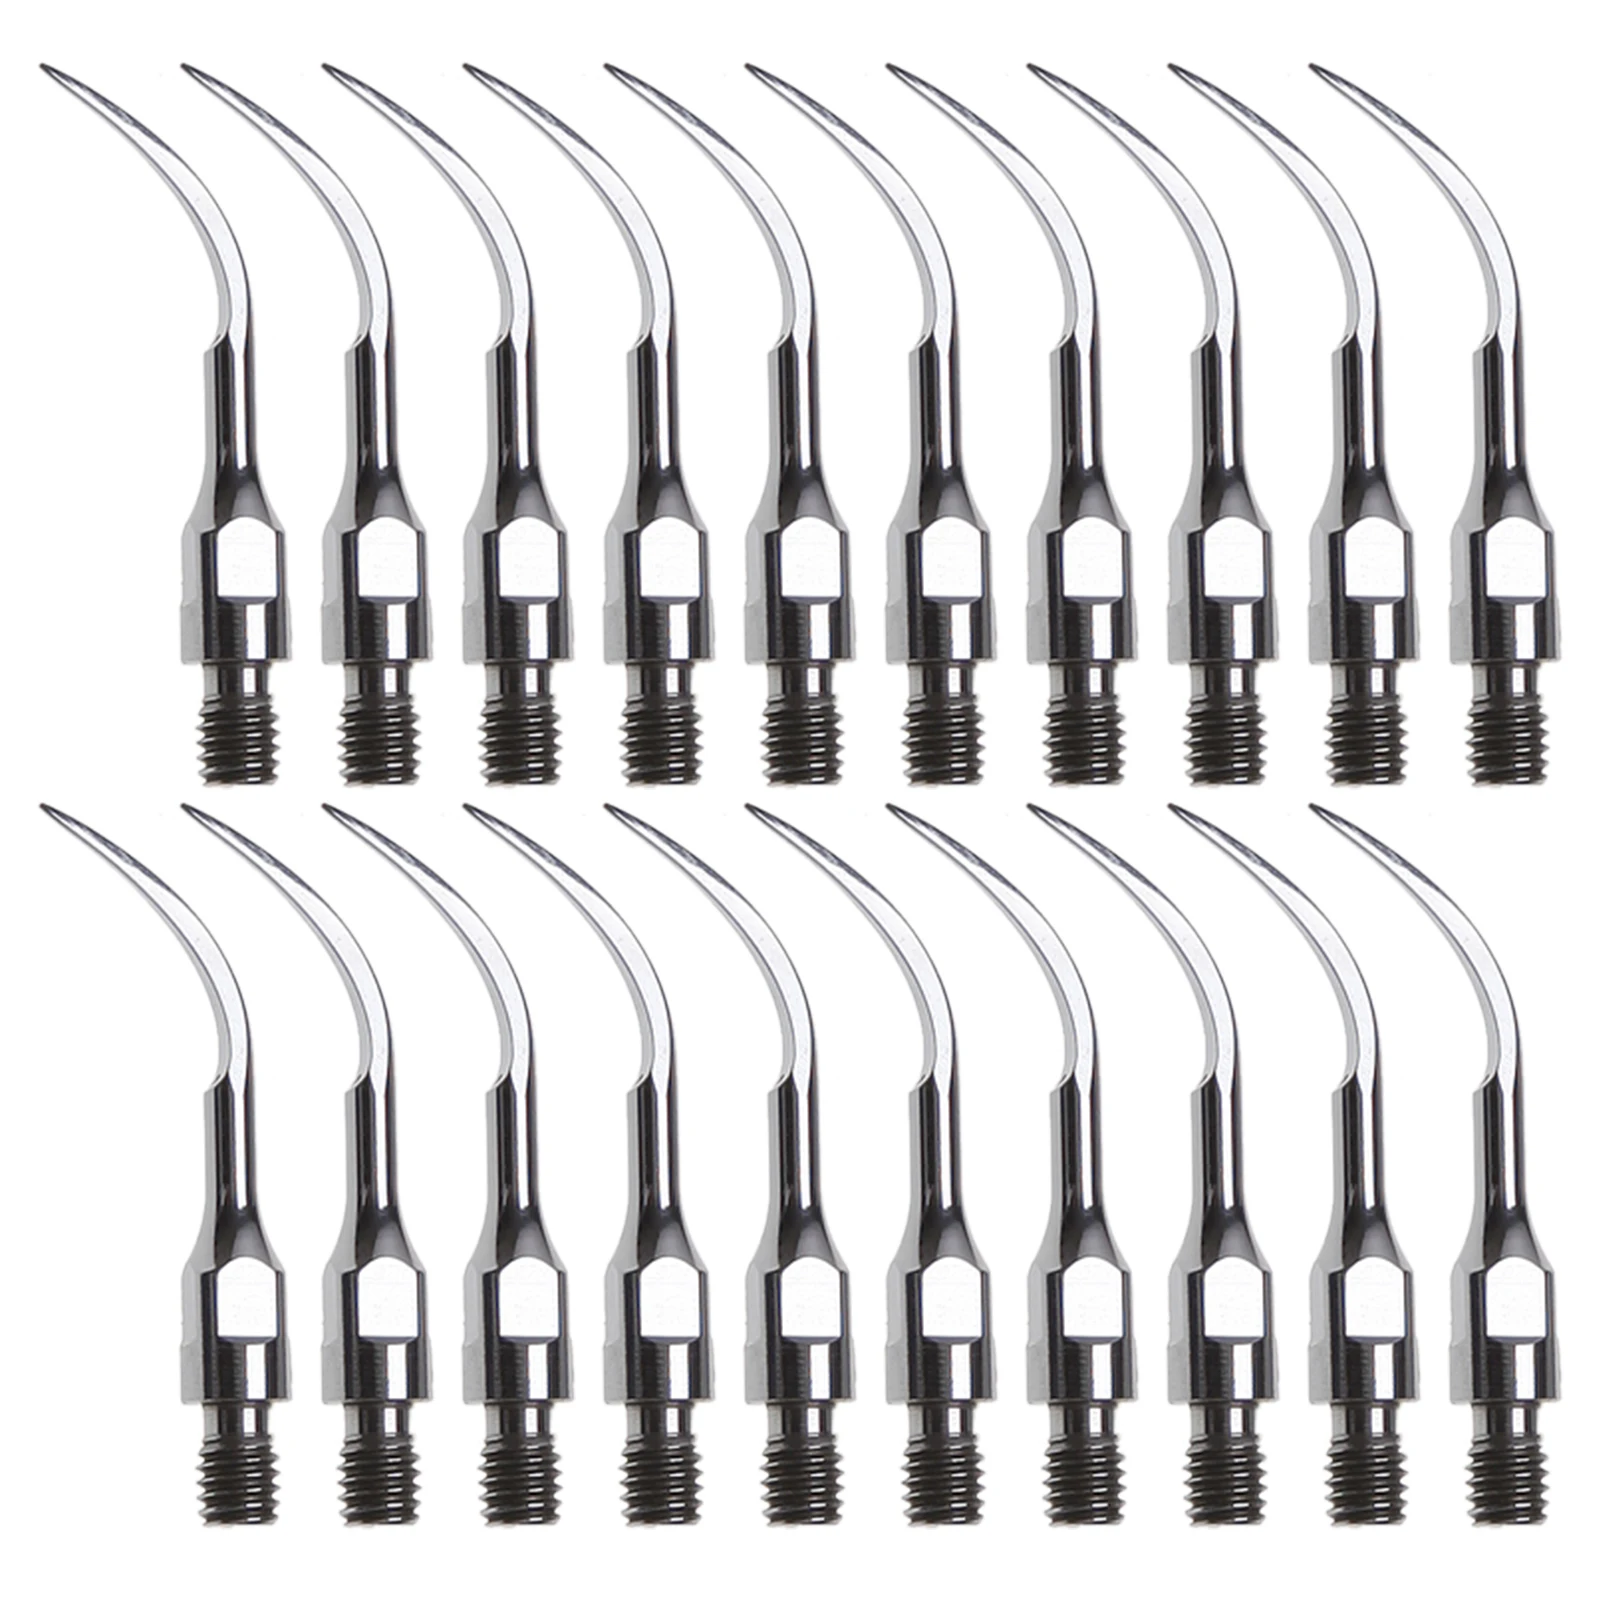 20Pcs Dental Ultrasonic Perio Scaling Tips Insert for SIRONA Scaler Handpiece PS1